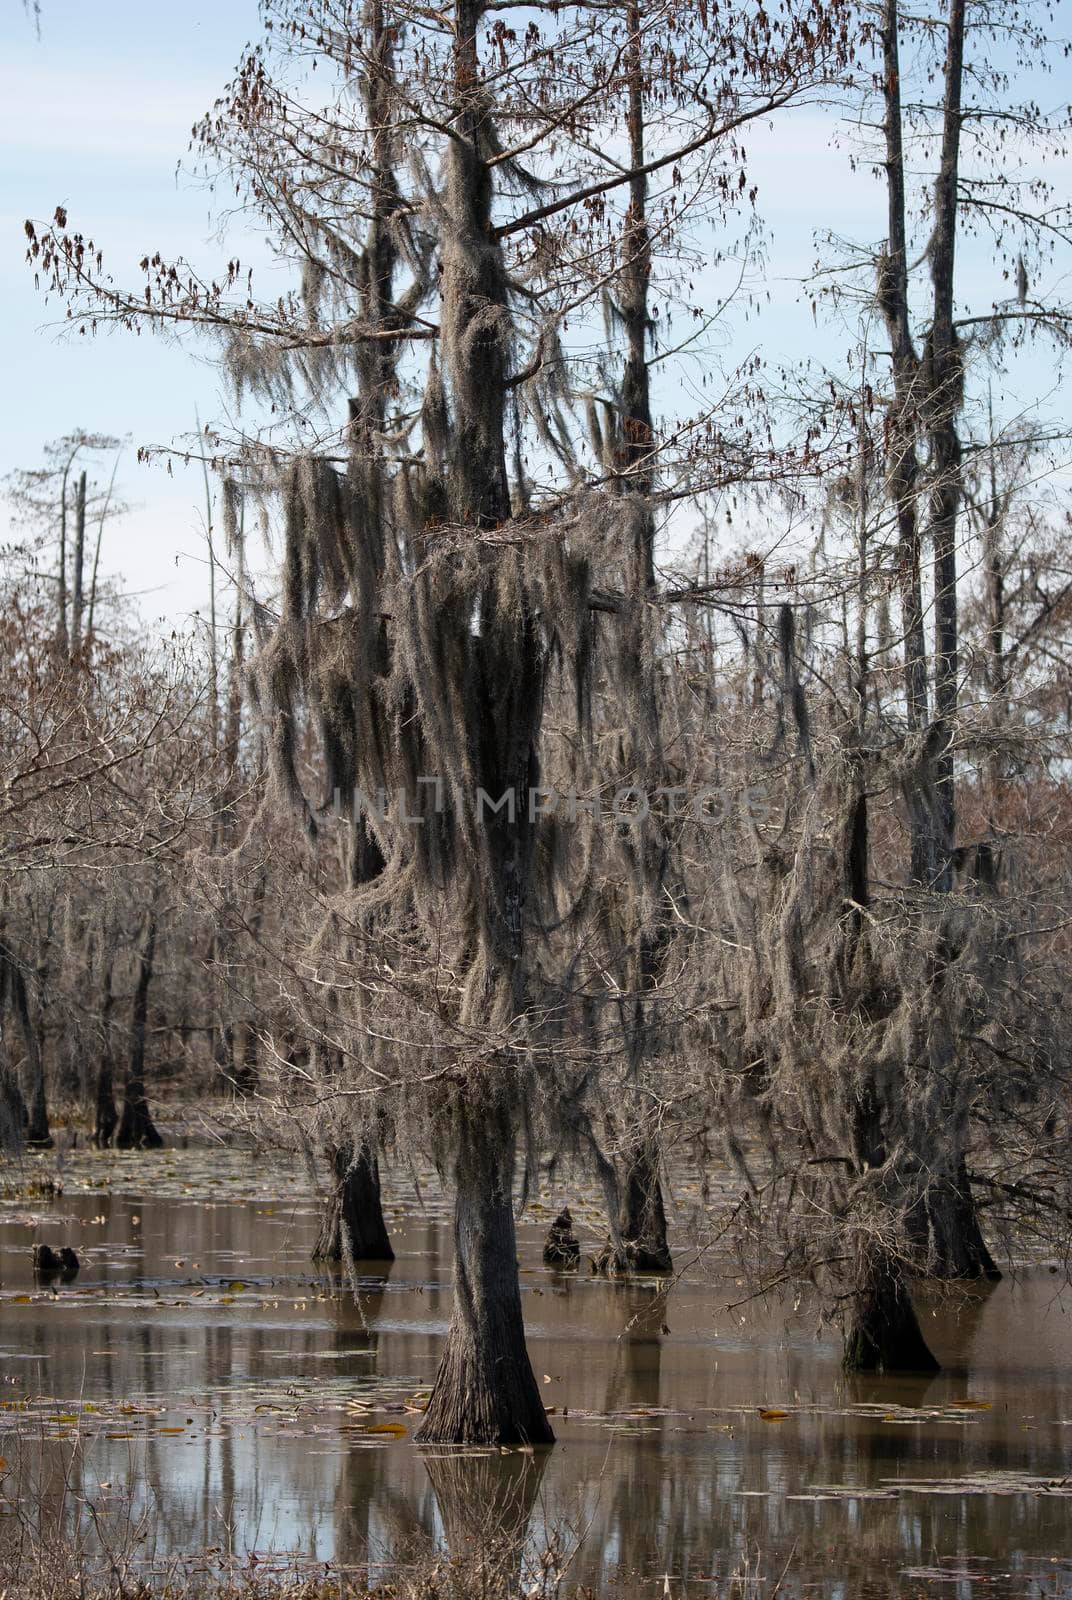 Trees Covered with Spanish Moss by tornado98